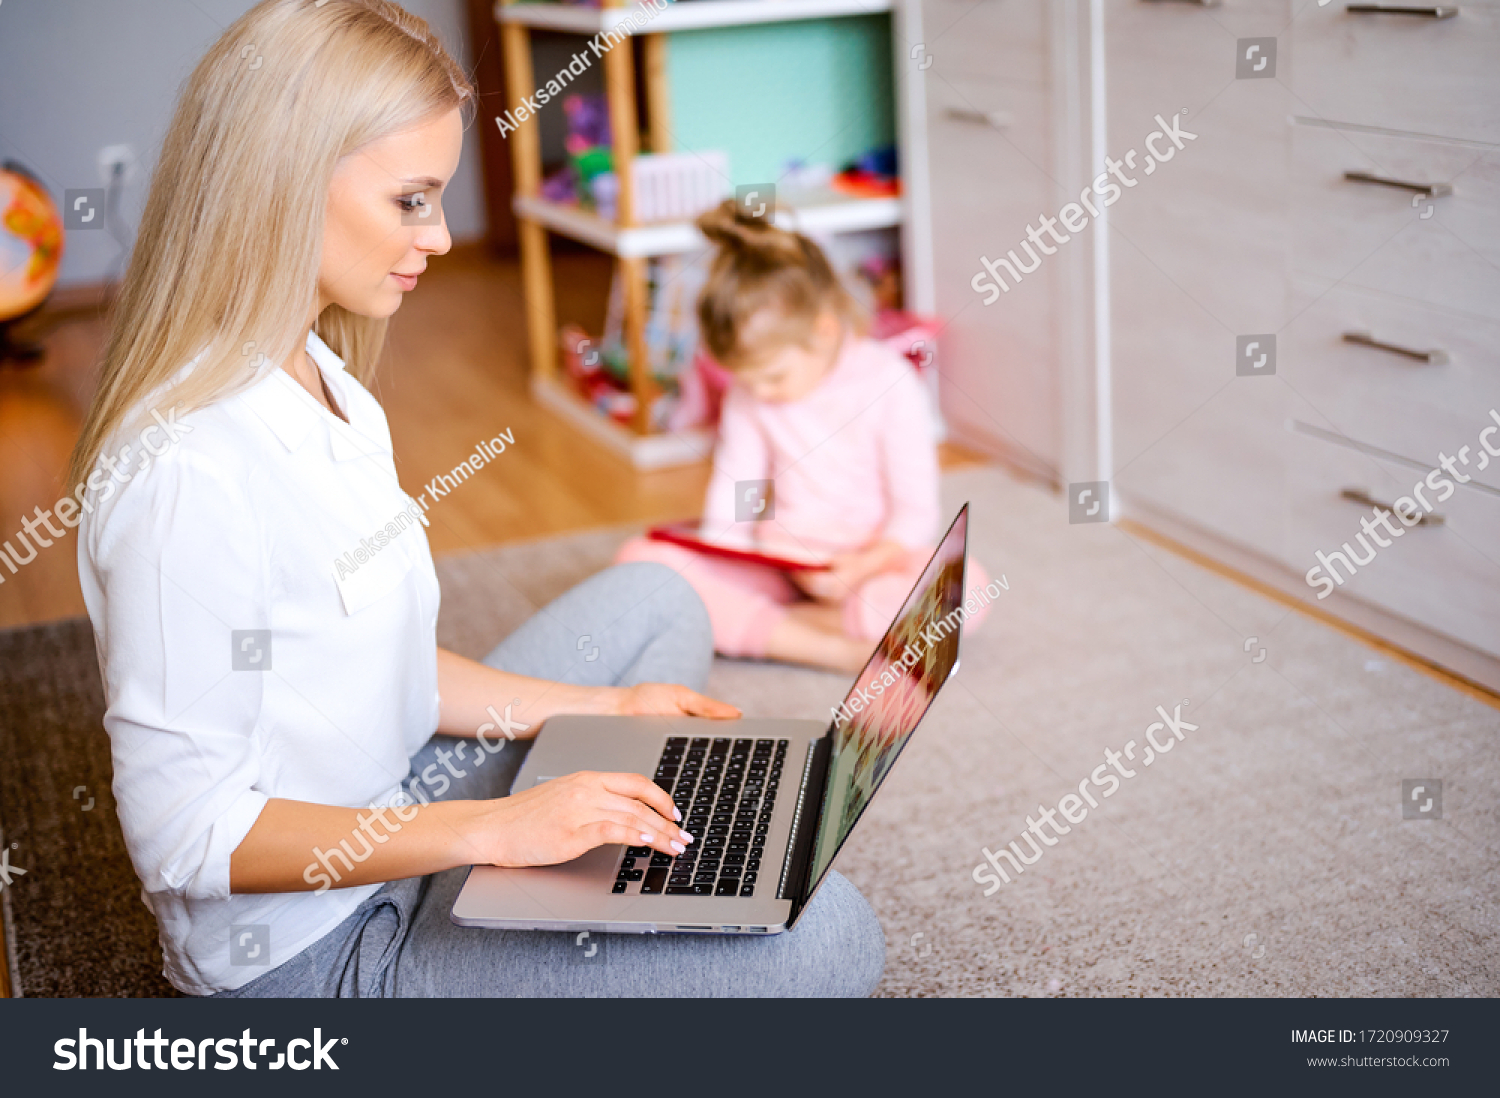 Young happy mother works on a computer at home on the floor, the child watches multifilny on a digital tablet, plays games on the computer, family concept. #1720909327